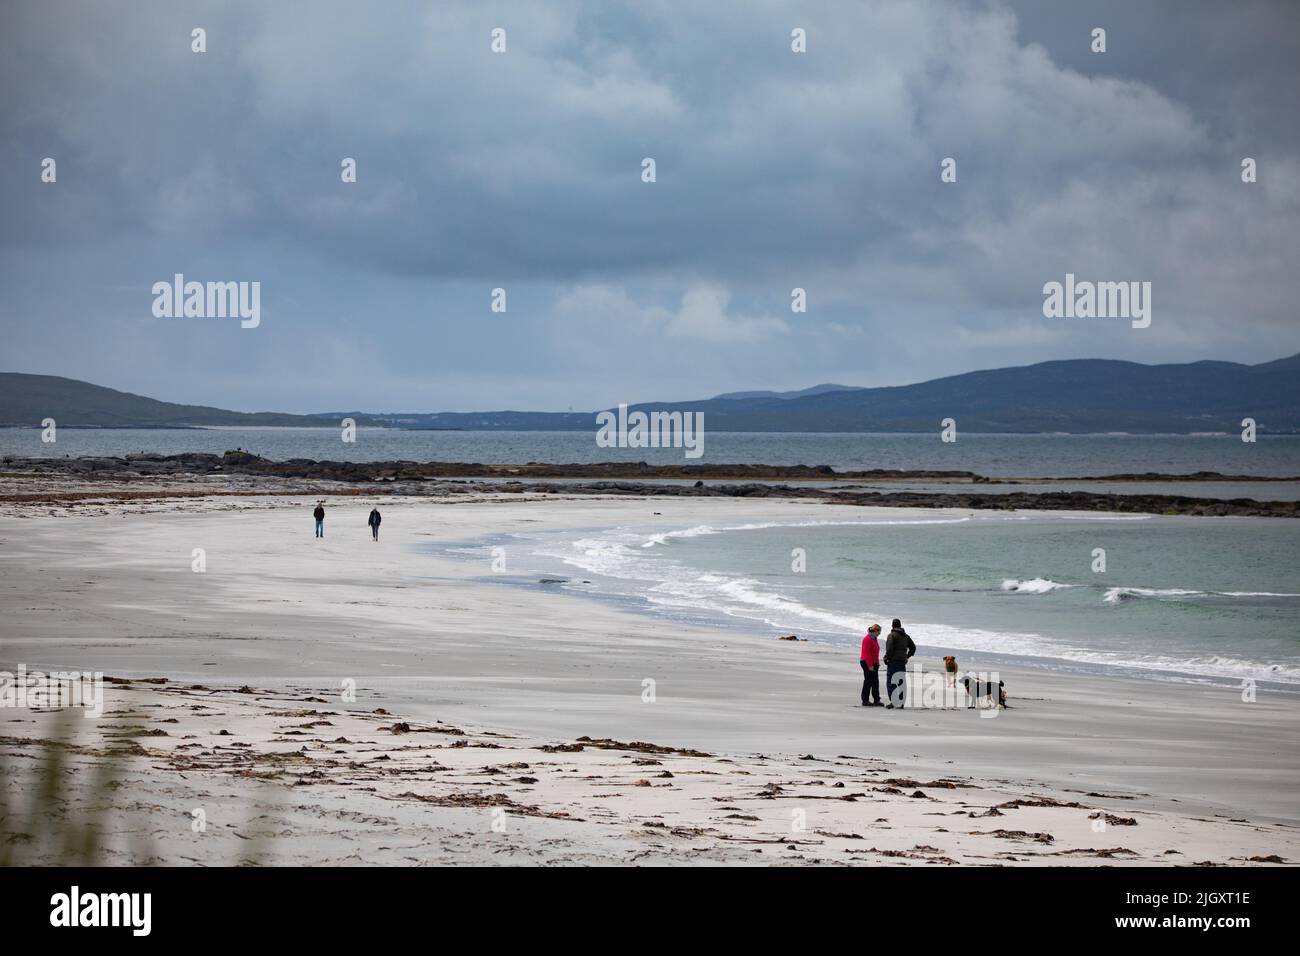 A woman in a red coat, with other people and dogs on Gearraidh na Monadh beach on South Uist in the Hebrides. Stock Photo